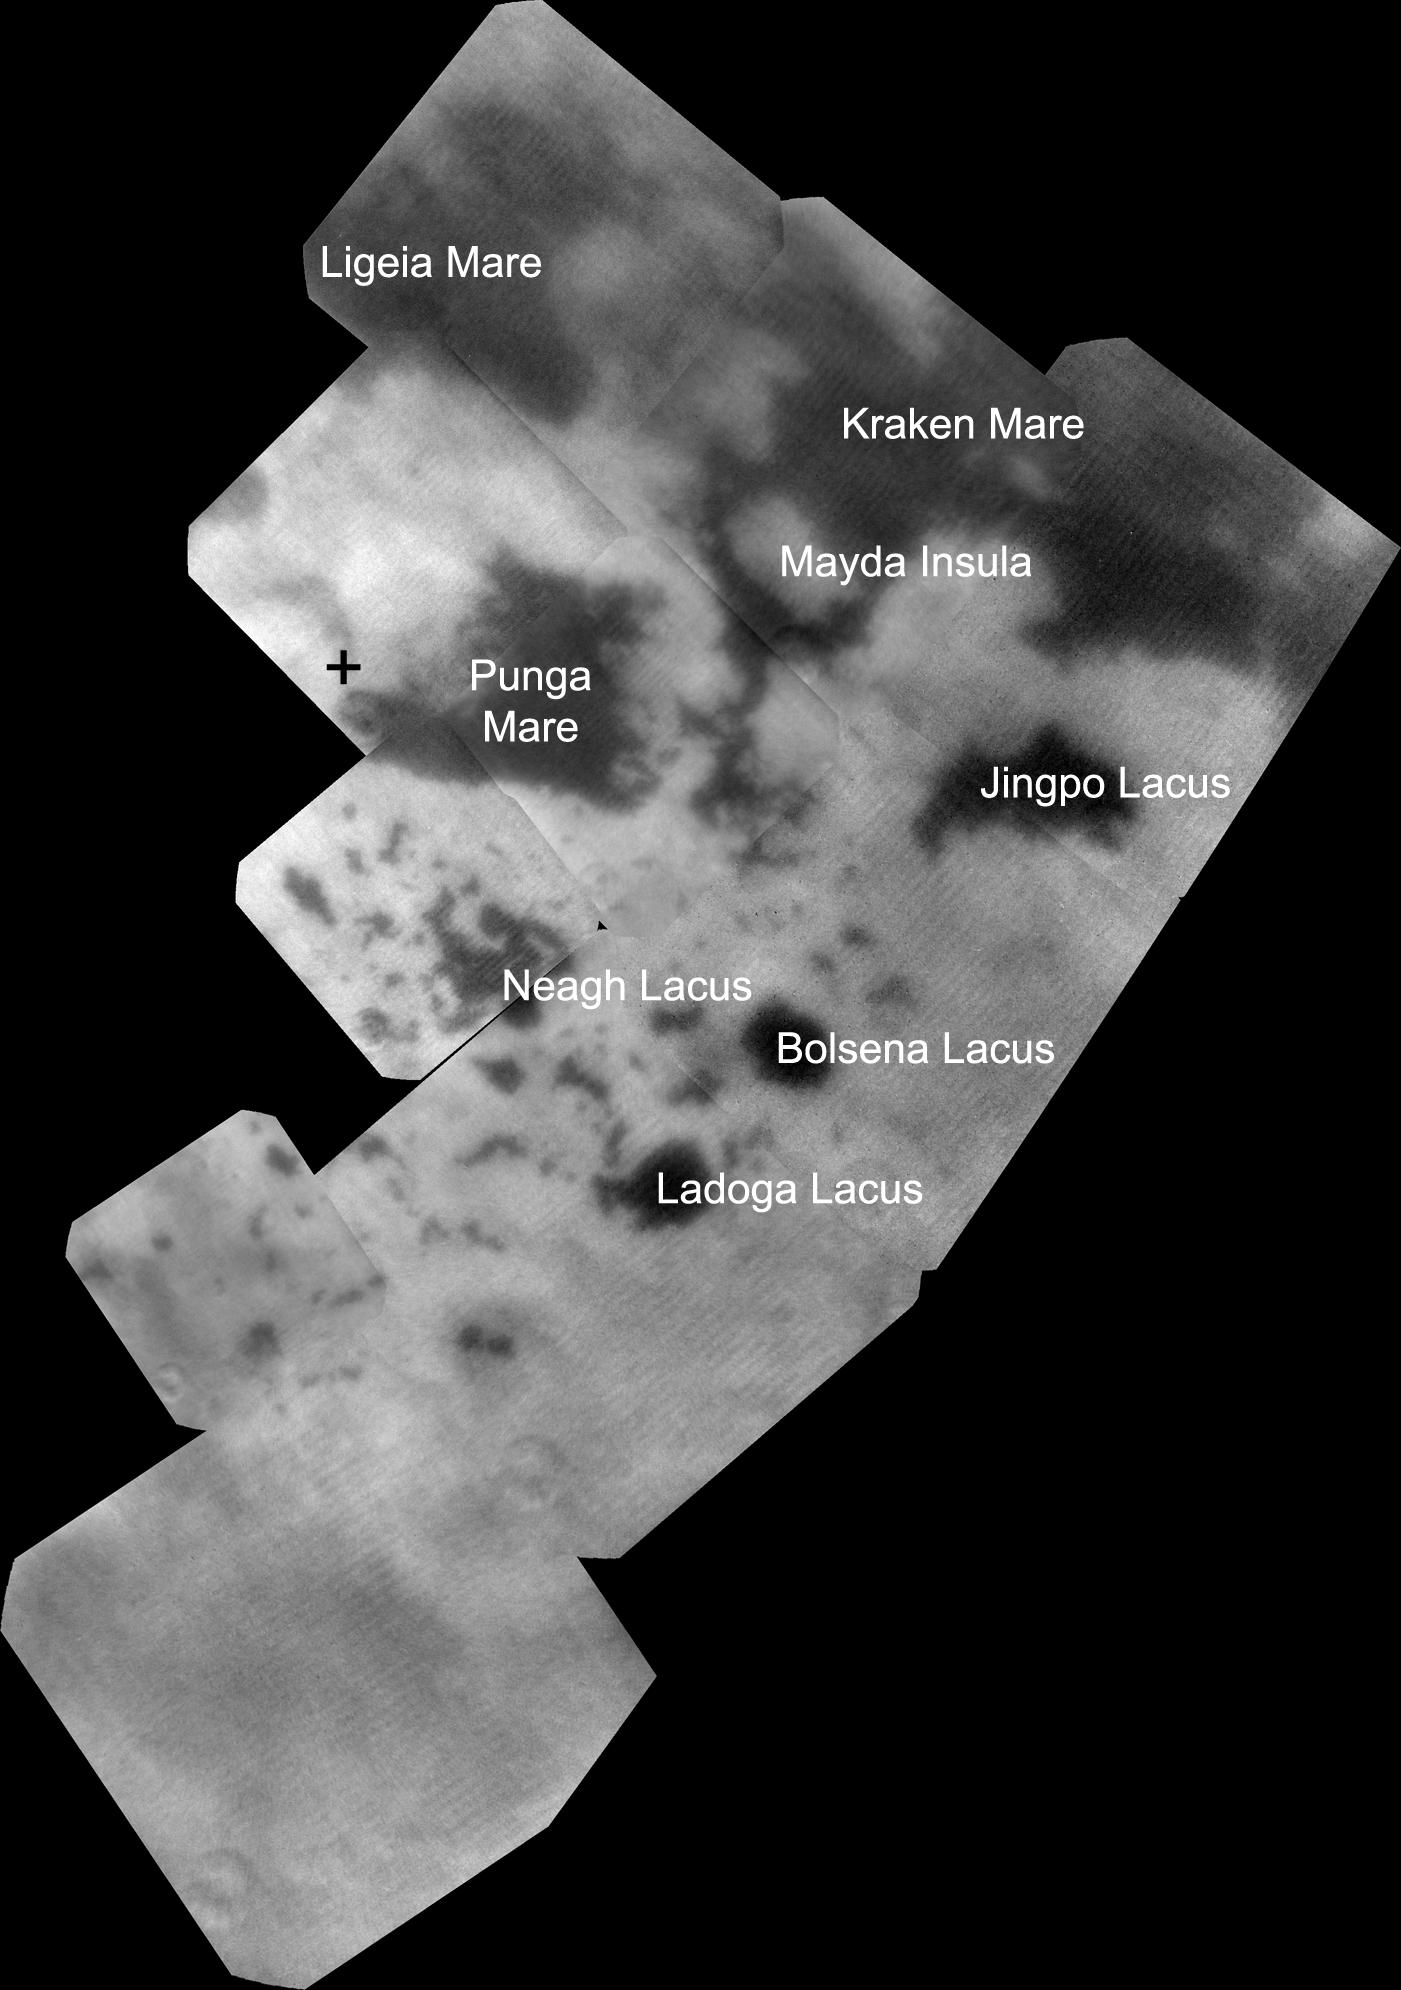 The vast hydrocarbon seas and lakes (dark shapes) near the north pole of Saturn's moon Titan sprawl out beneath the watchful eye of NASA's Cassini spacecraft.